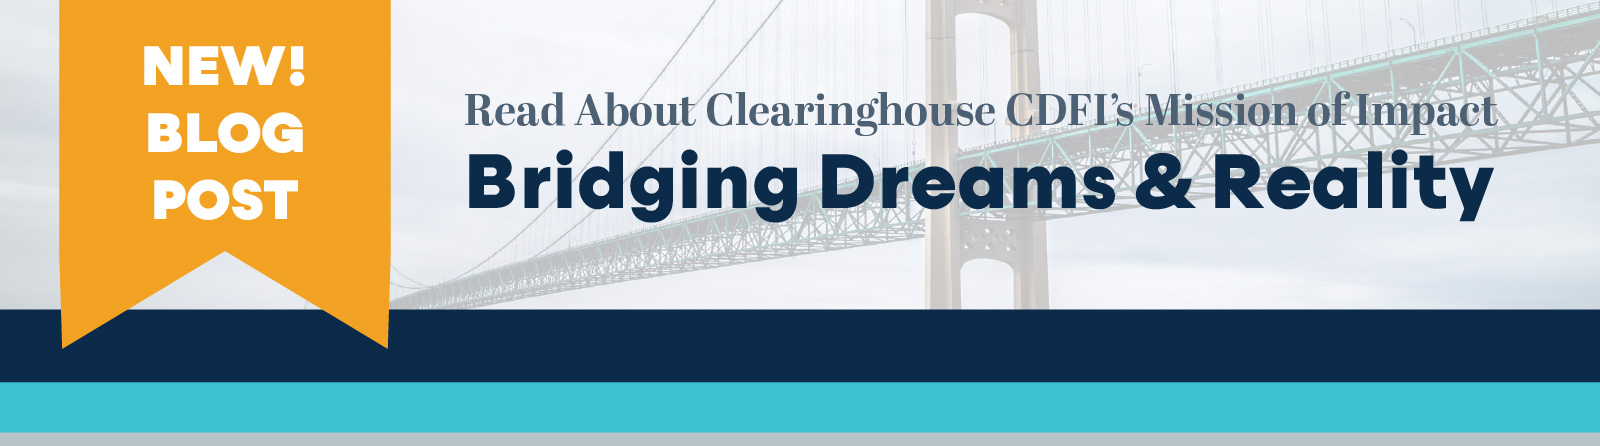 Image of Clearinghouse CDFI Project